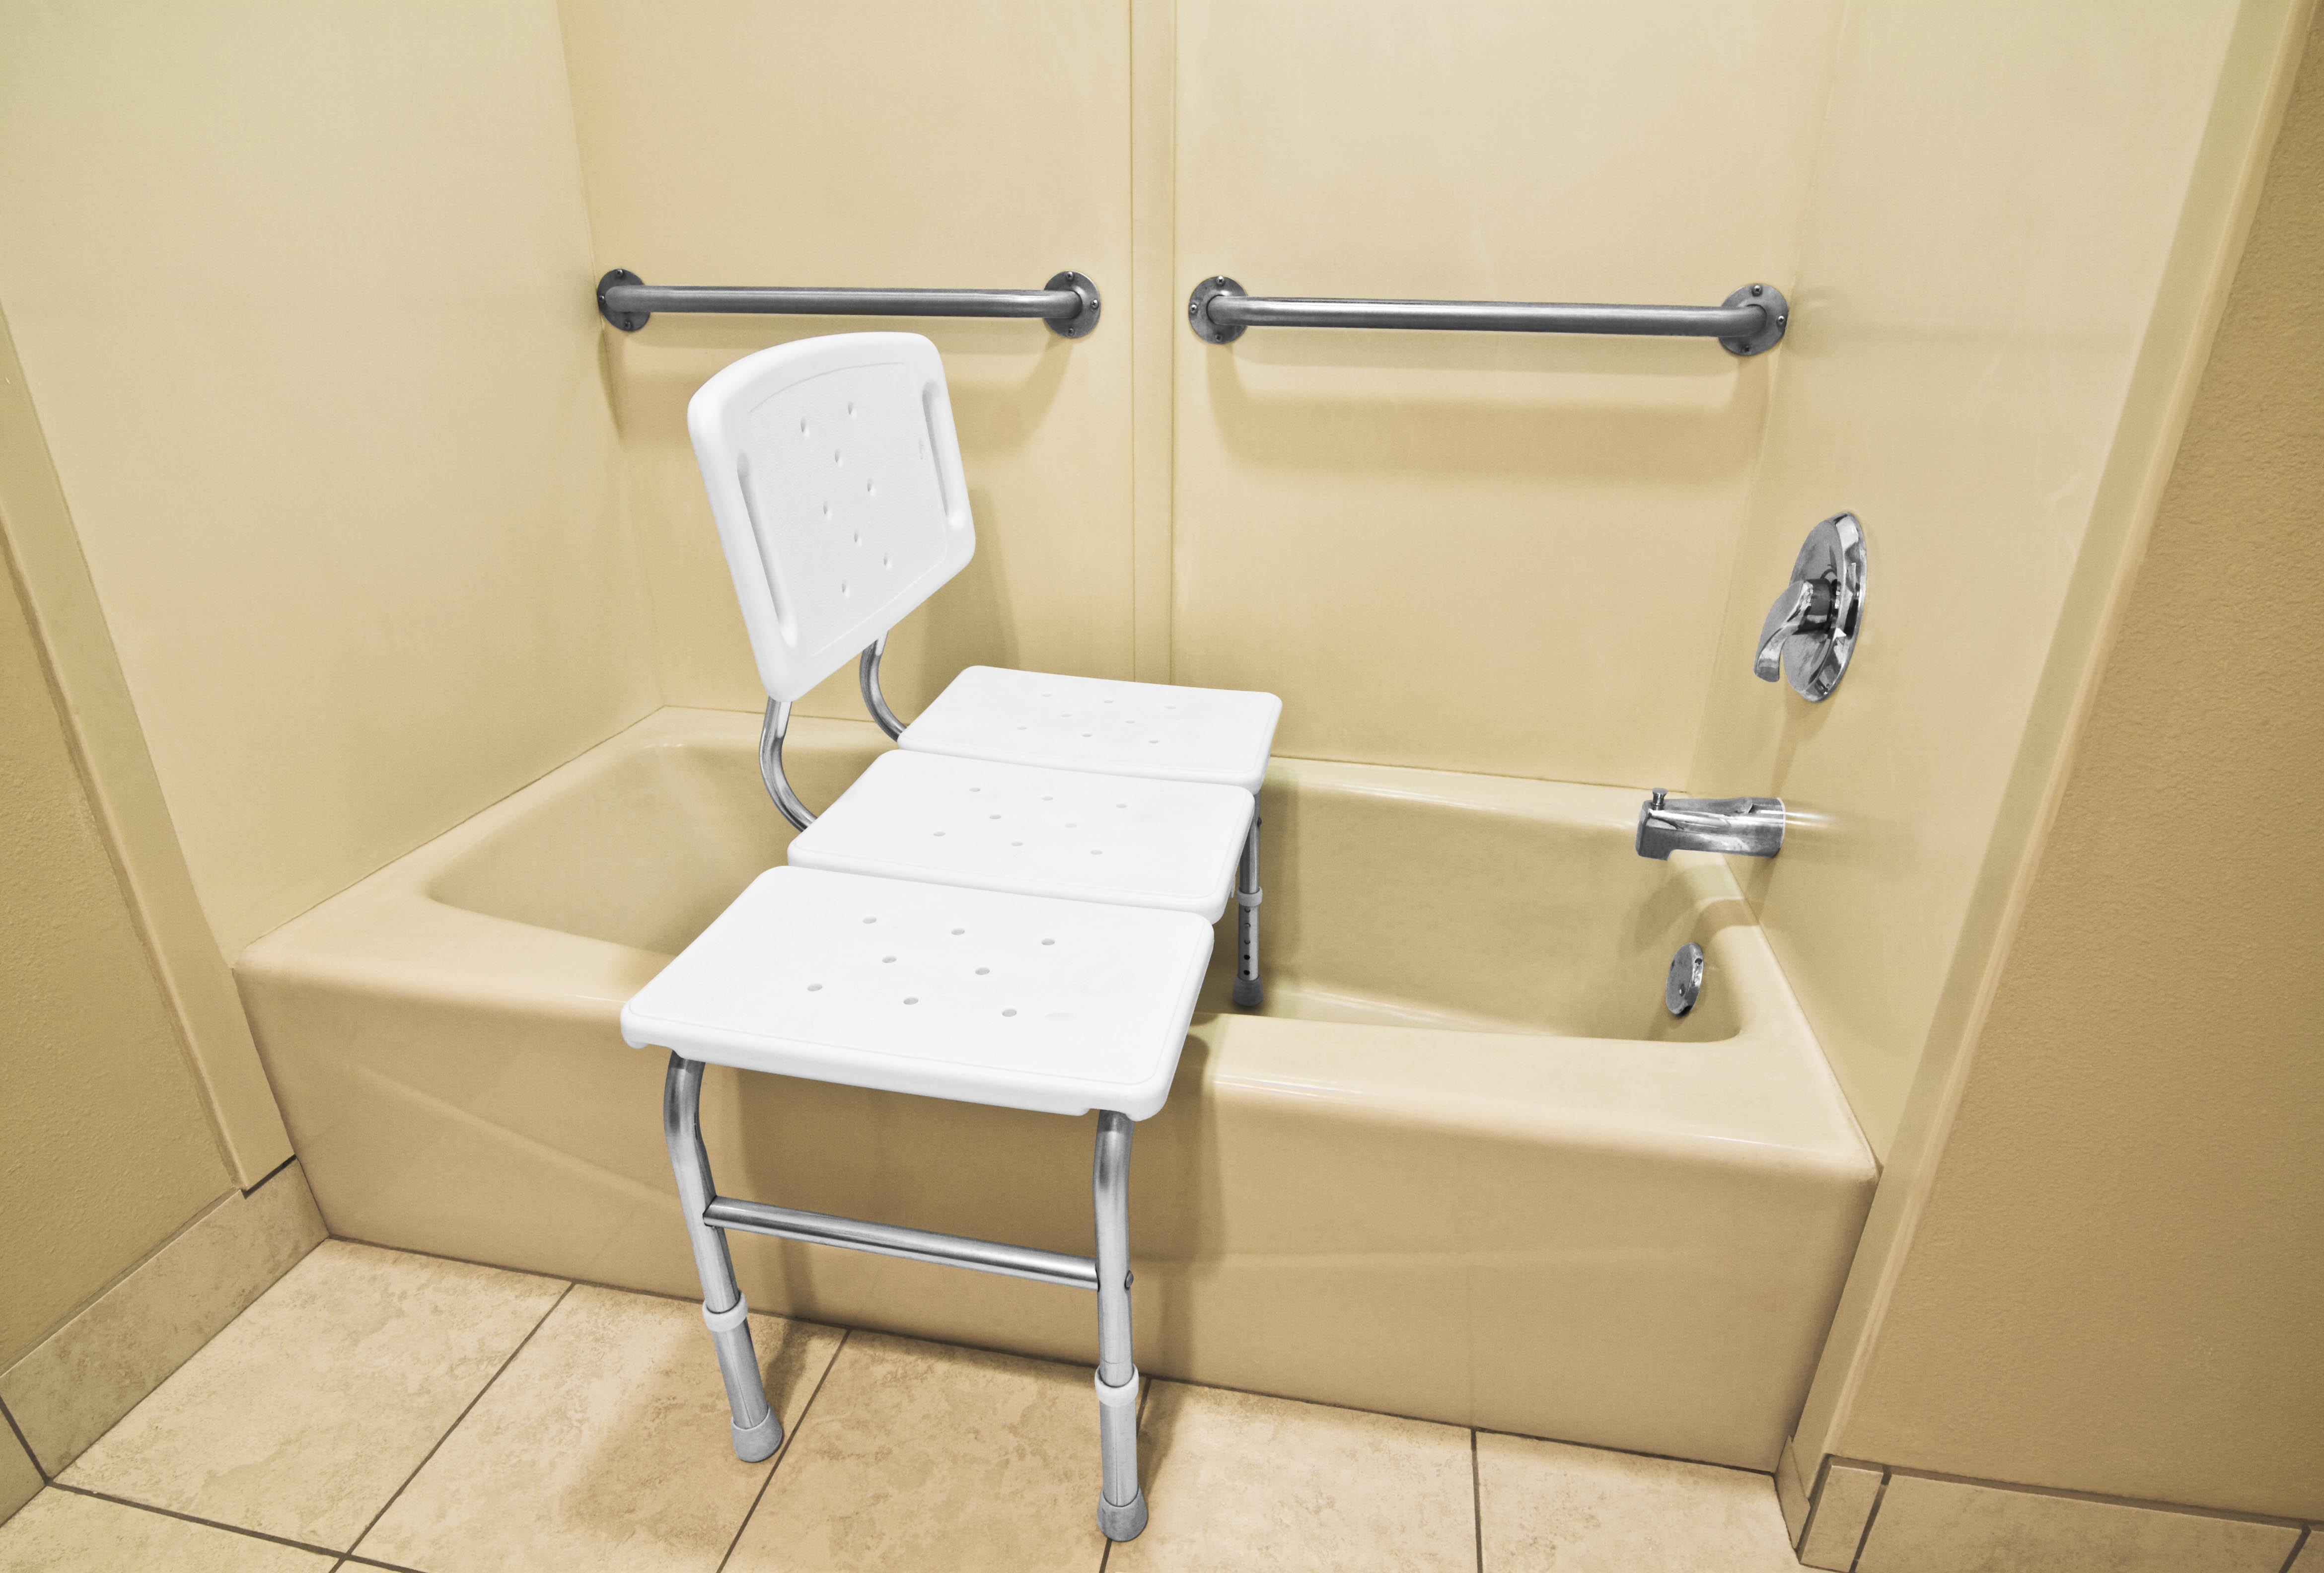 The 5 Best Shower Chairs for Elderly Reviews & Guide 2020